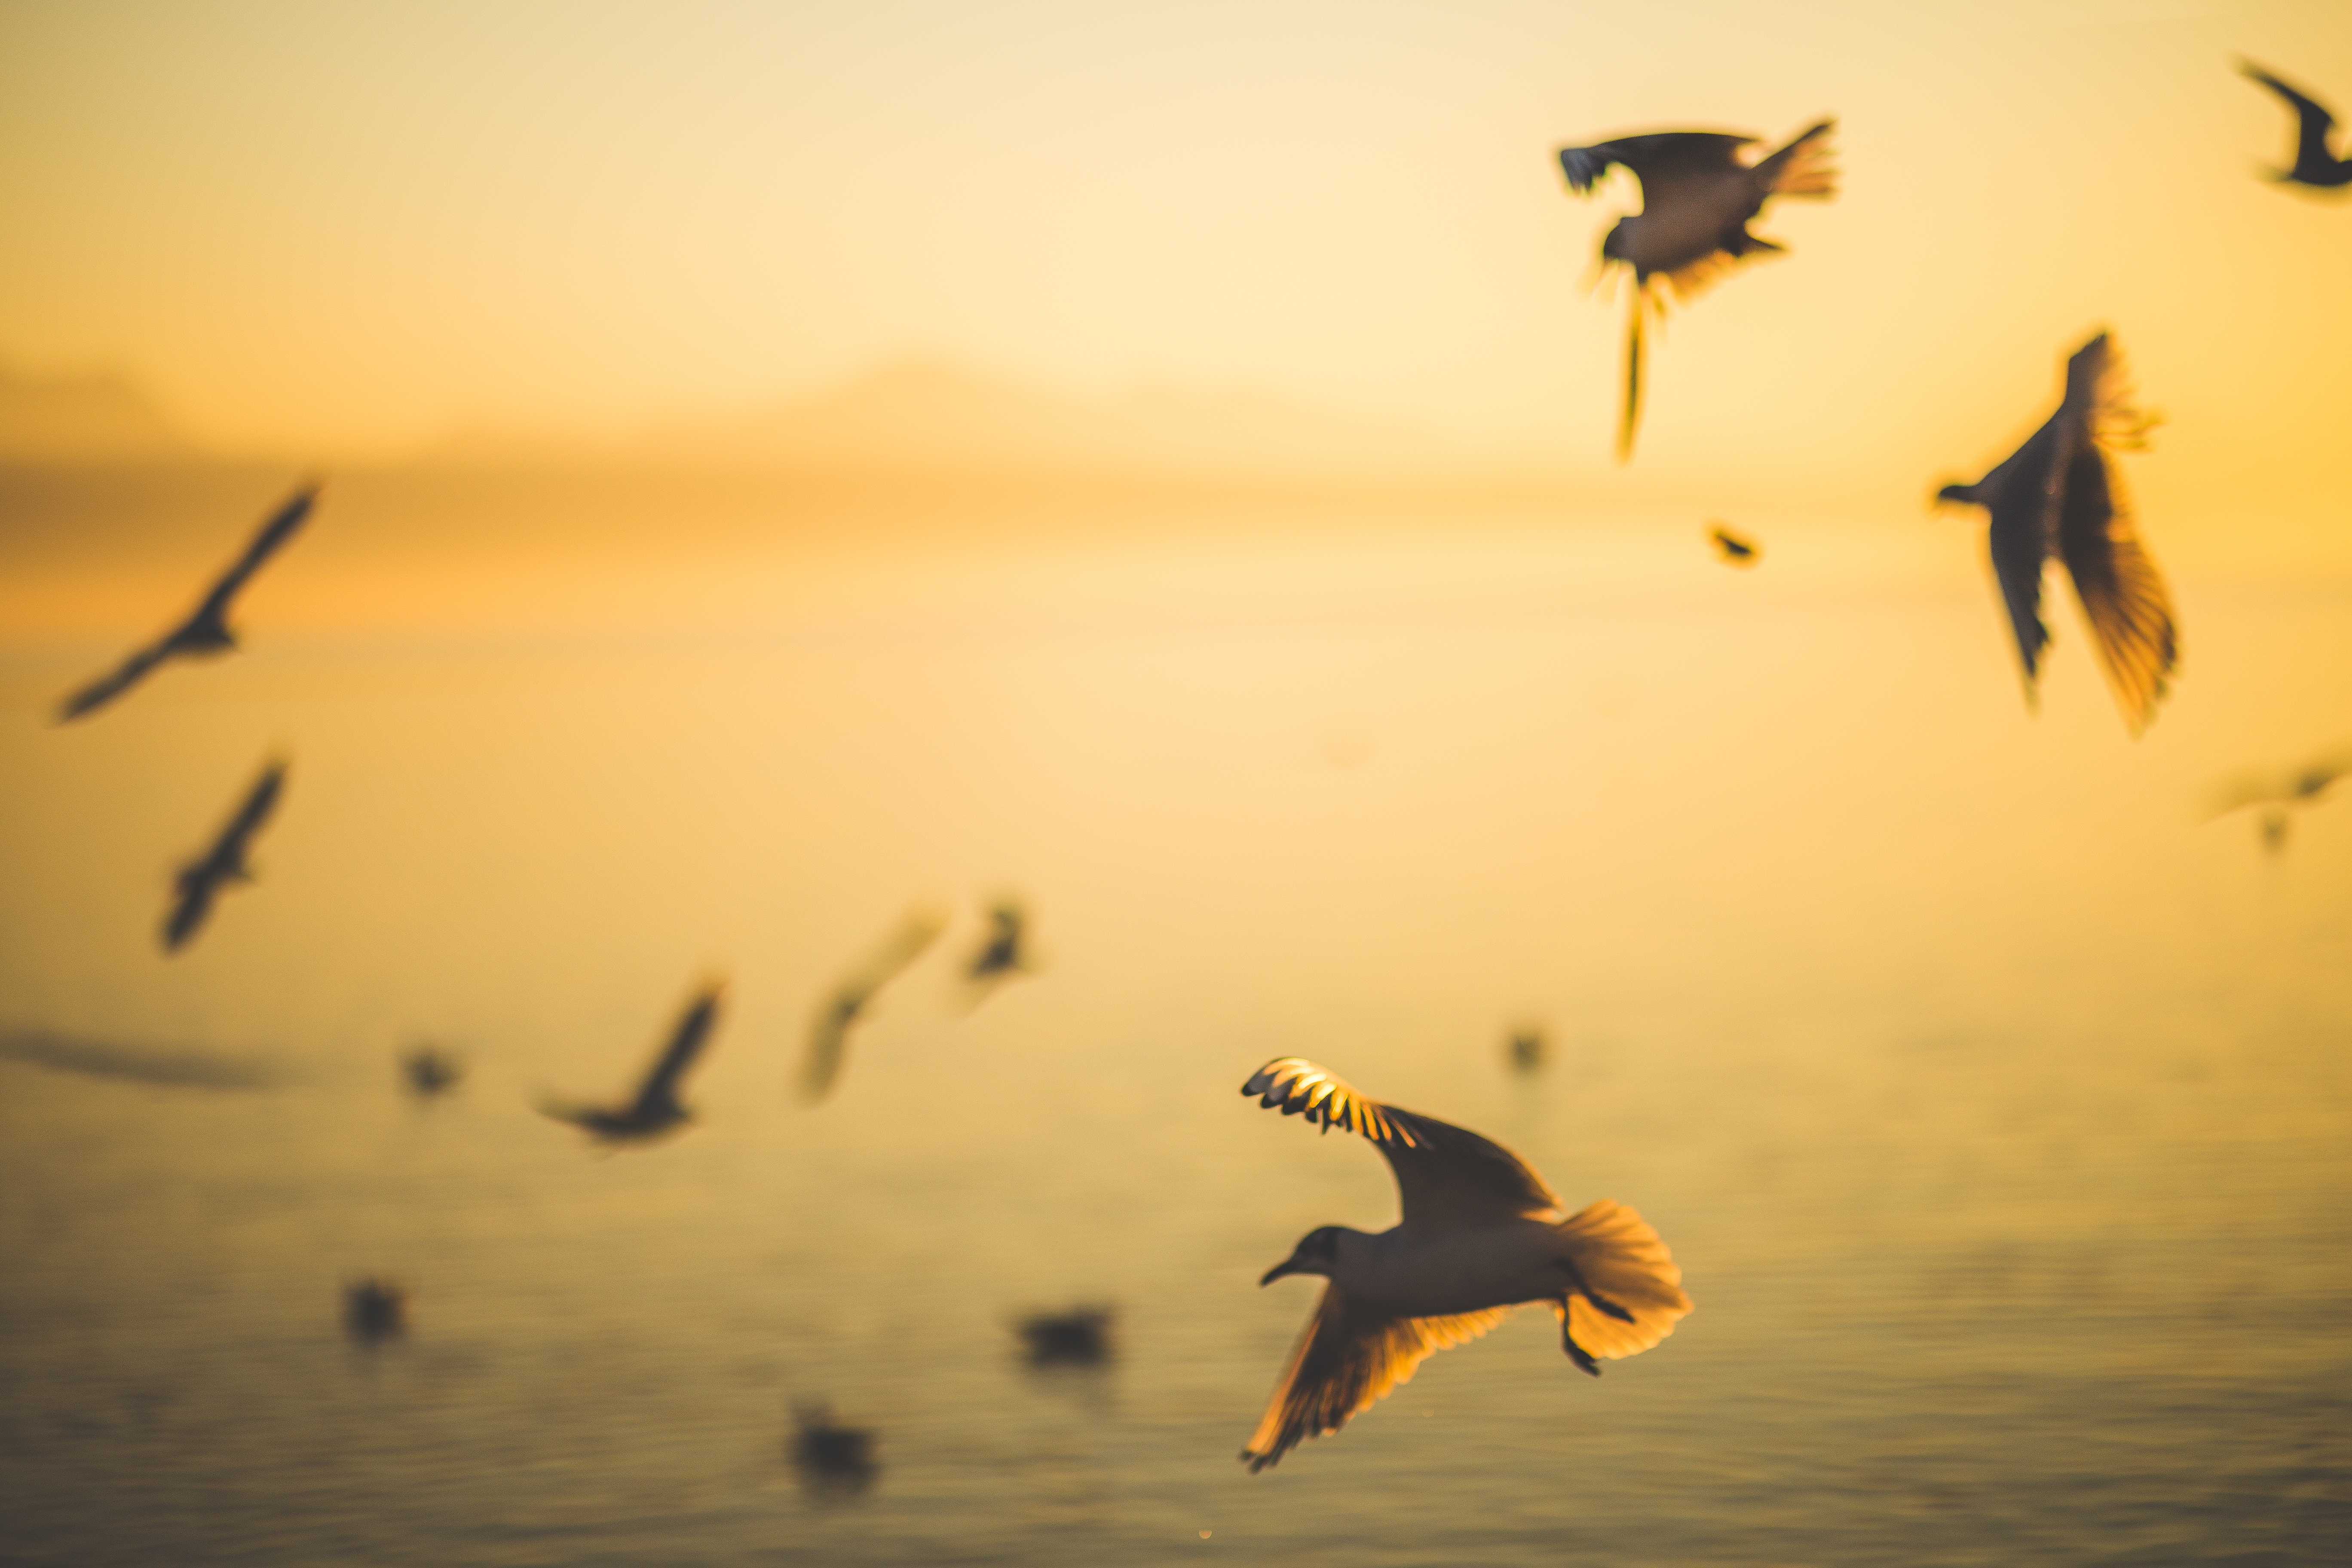 A flock of birds silhouette against a yellow-orange sky.